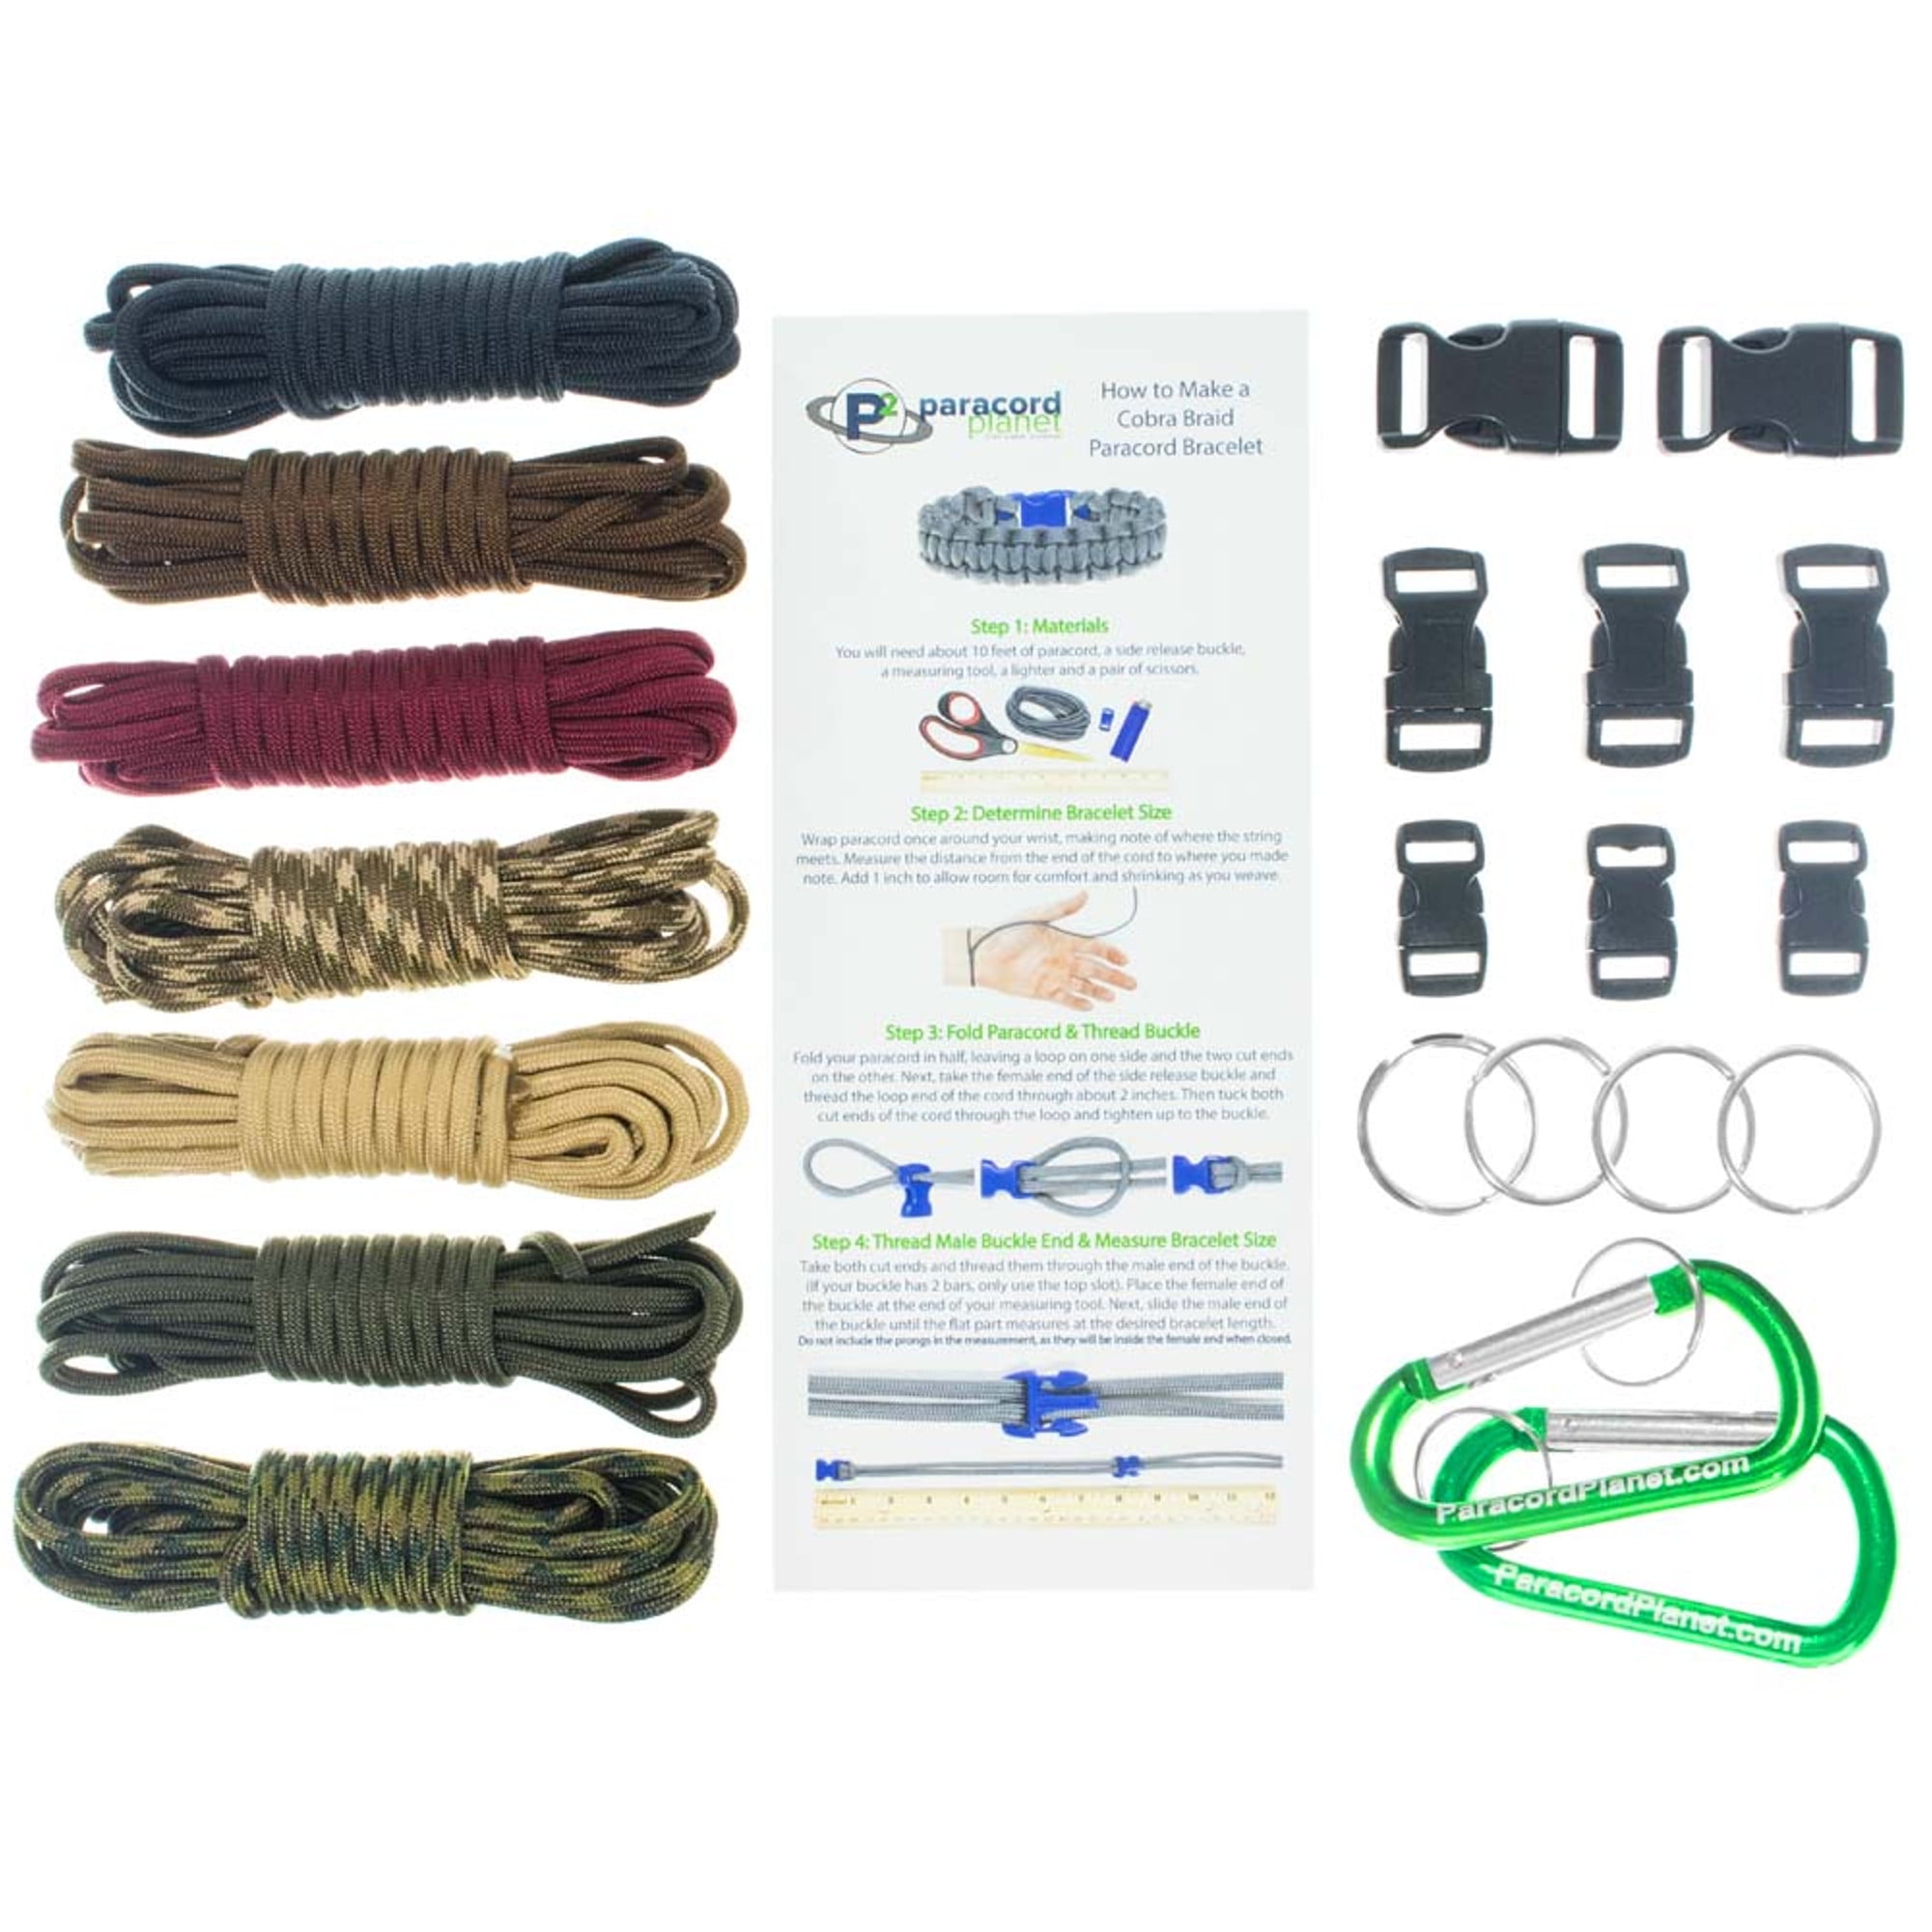 Paracord Survival Bracelet Project Kit 550 Parachute Cord Buckles Carabiners Key Rings Starter Hardware Kits Include Paracord Needle Tongs Made In Usa Walmart Com Walmart Com